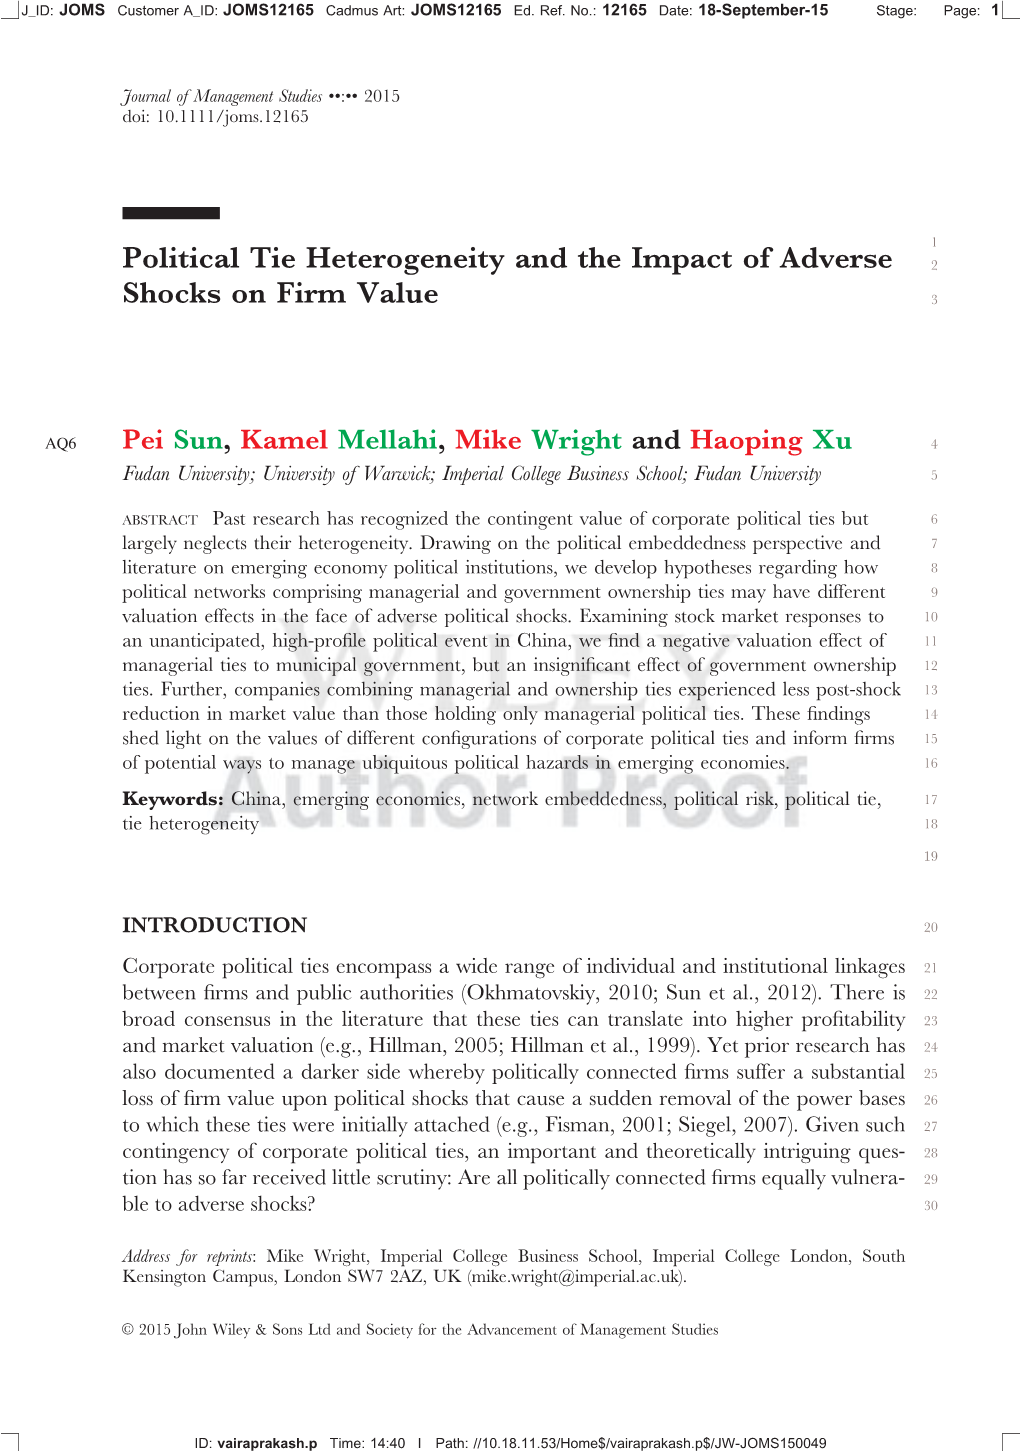 Political Tie Heterogeneity and the Impact of Adverse Shocks on Firm